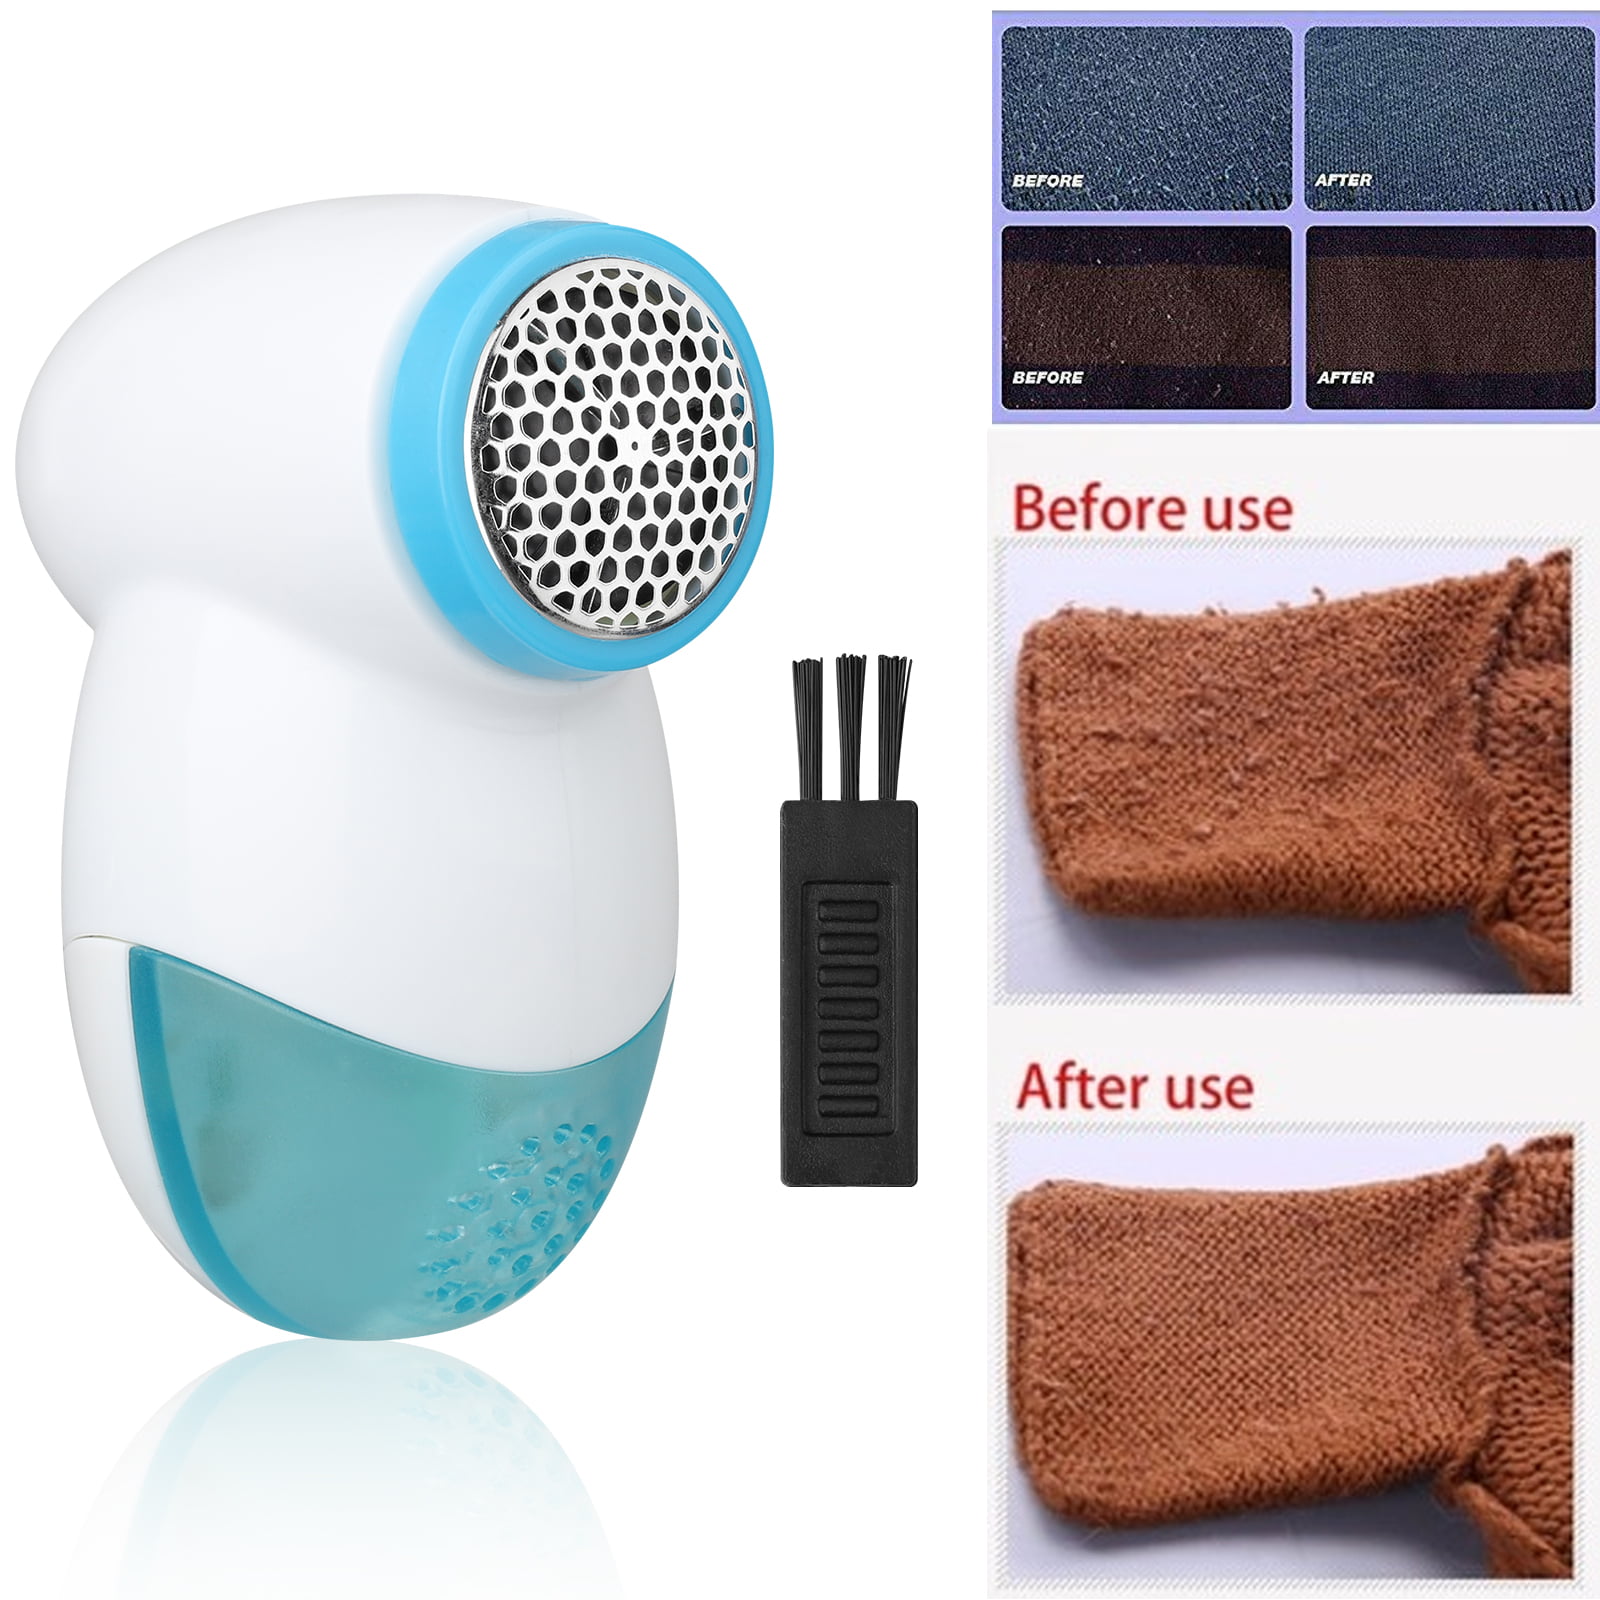 Knitwear Carpet & Blankets Lionina Portable Fabric Shaver Electric Lint Remover for Sweater Bobble Remover Fabric Clothes